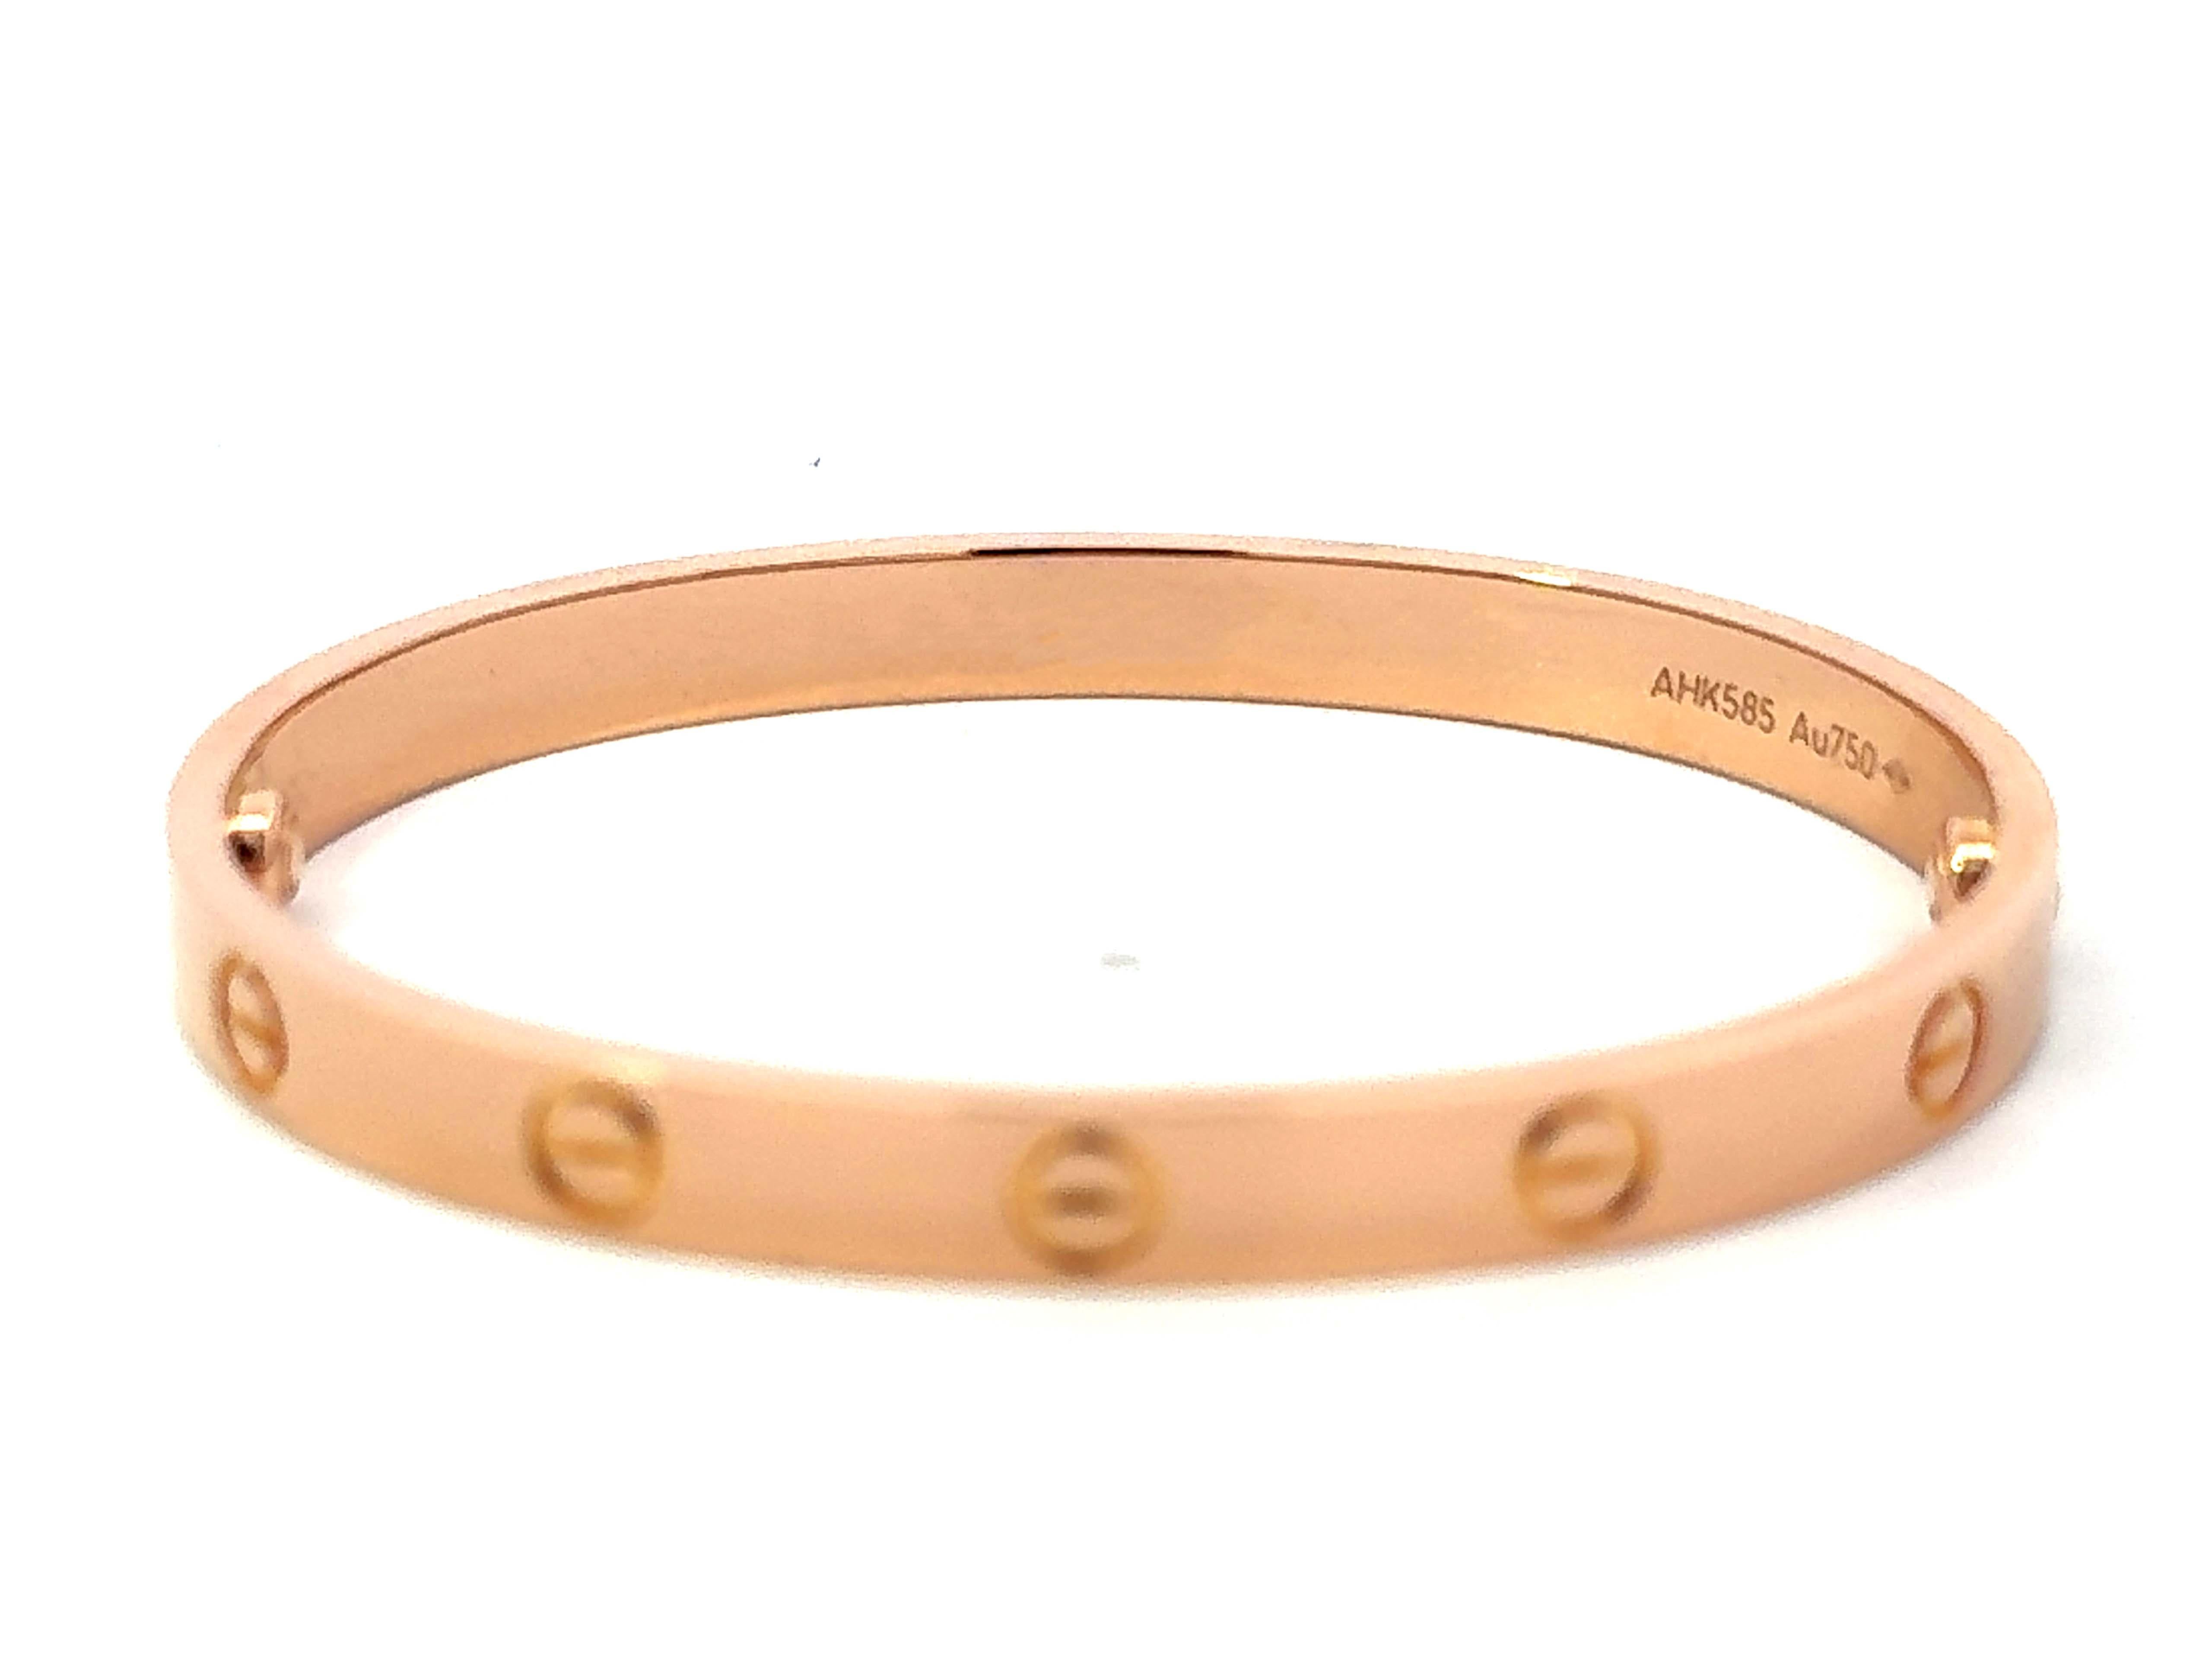 Cartier Love Bracelet in 18K Rose Gold Size 17 With Box and Papers In Excellent Condition For Sale In Honolulu, HI